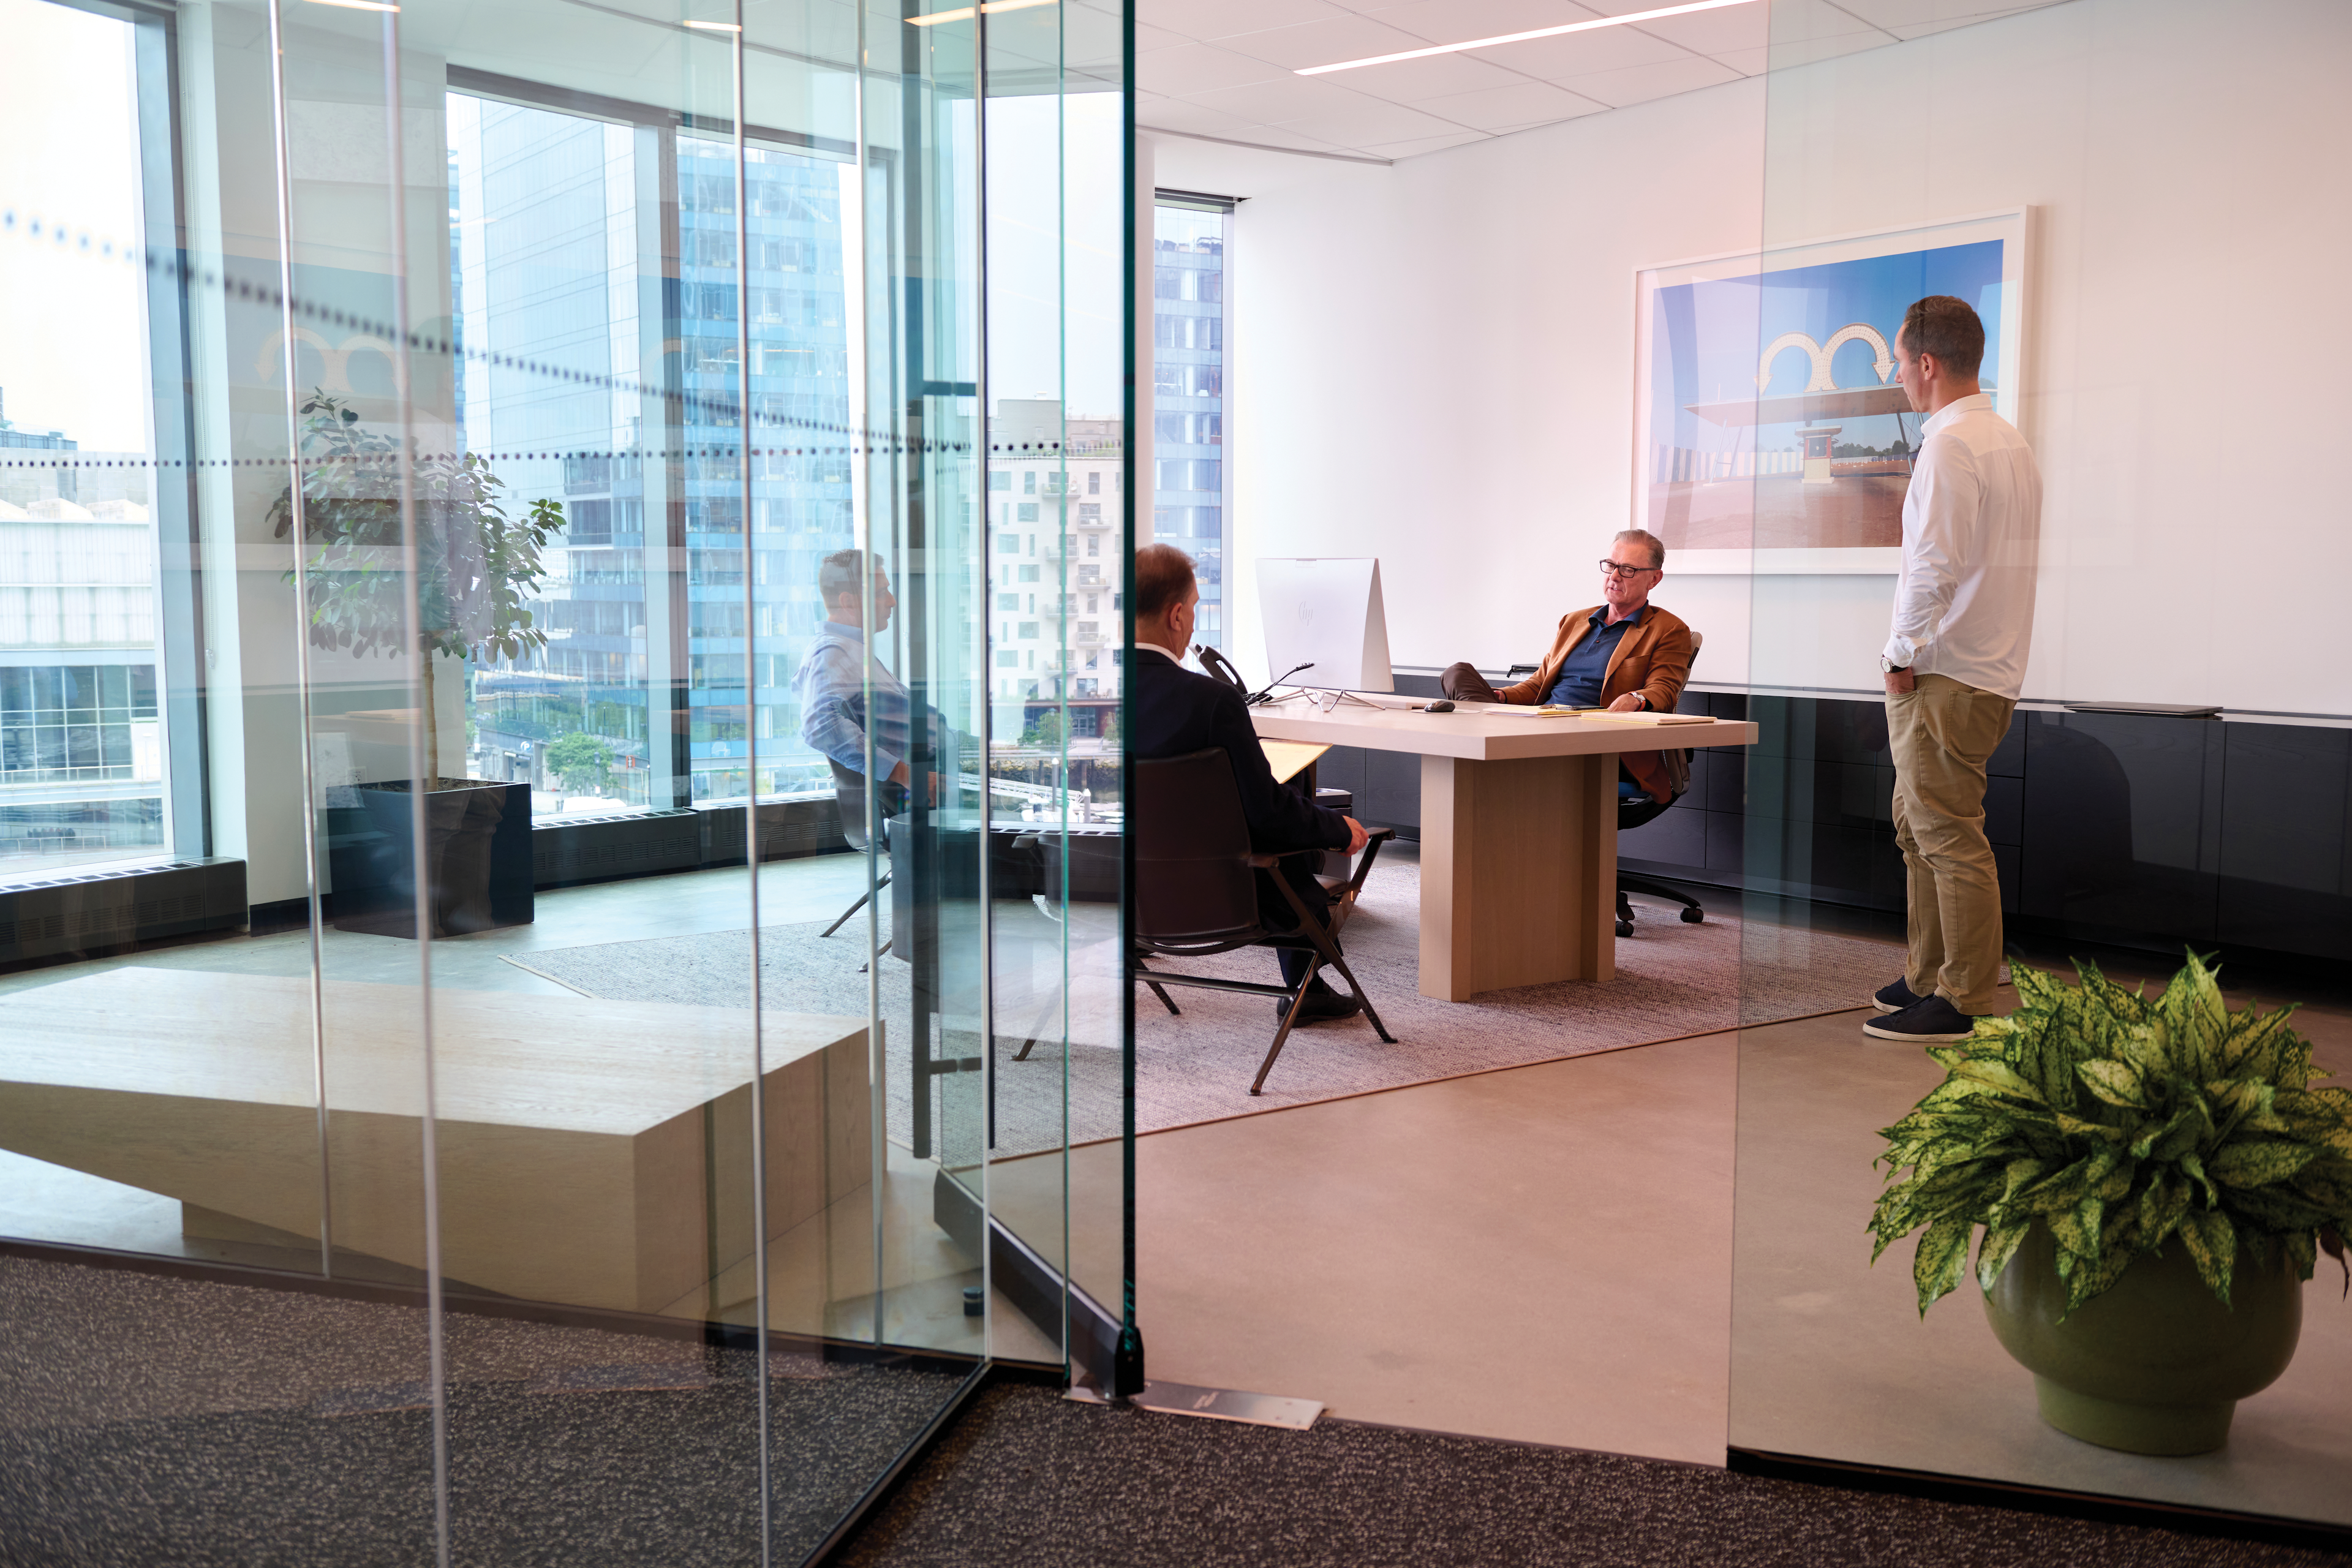 A handful of executives meet in a glass conference room in a high-rise office building